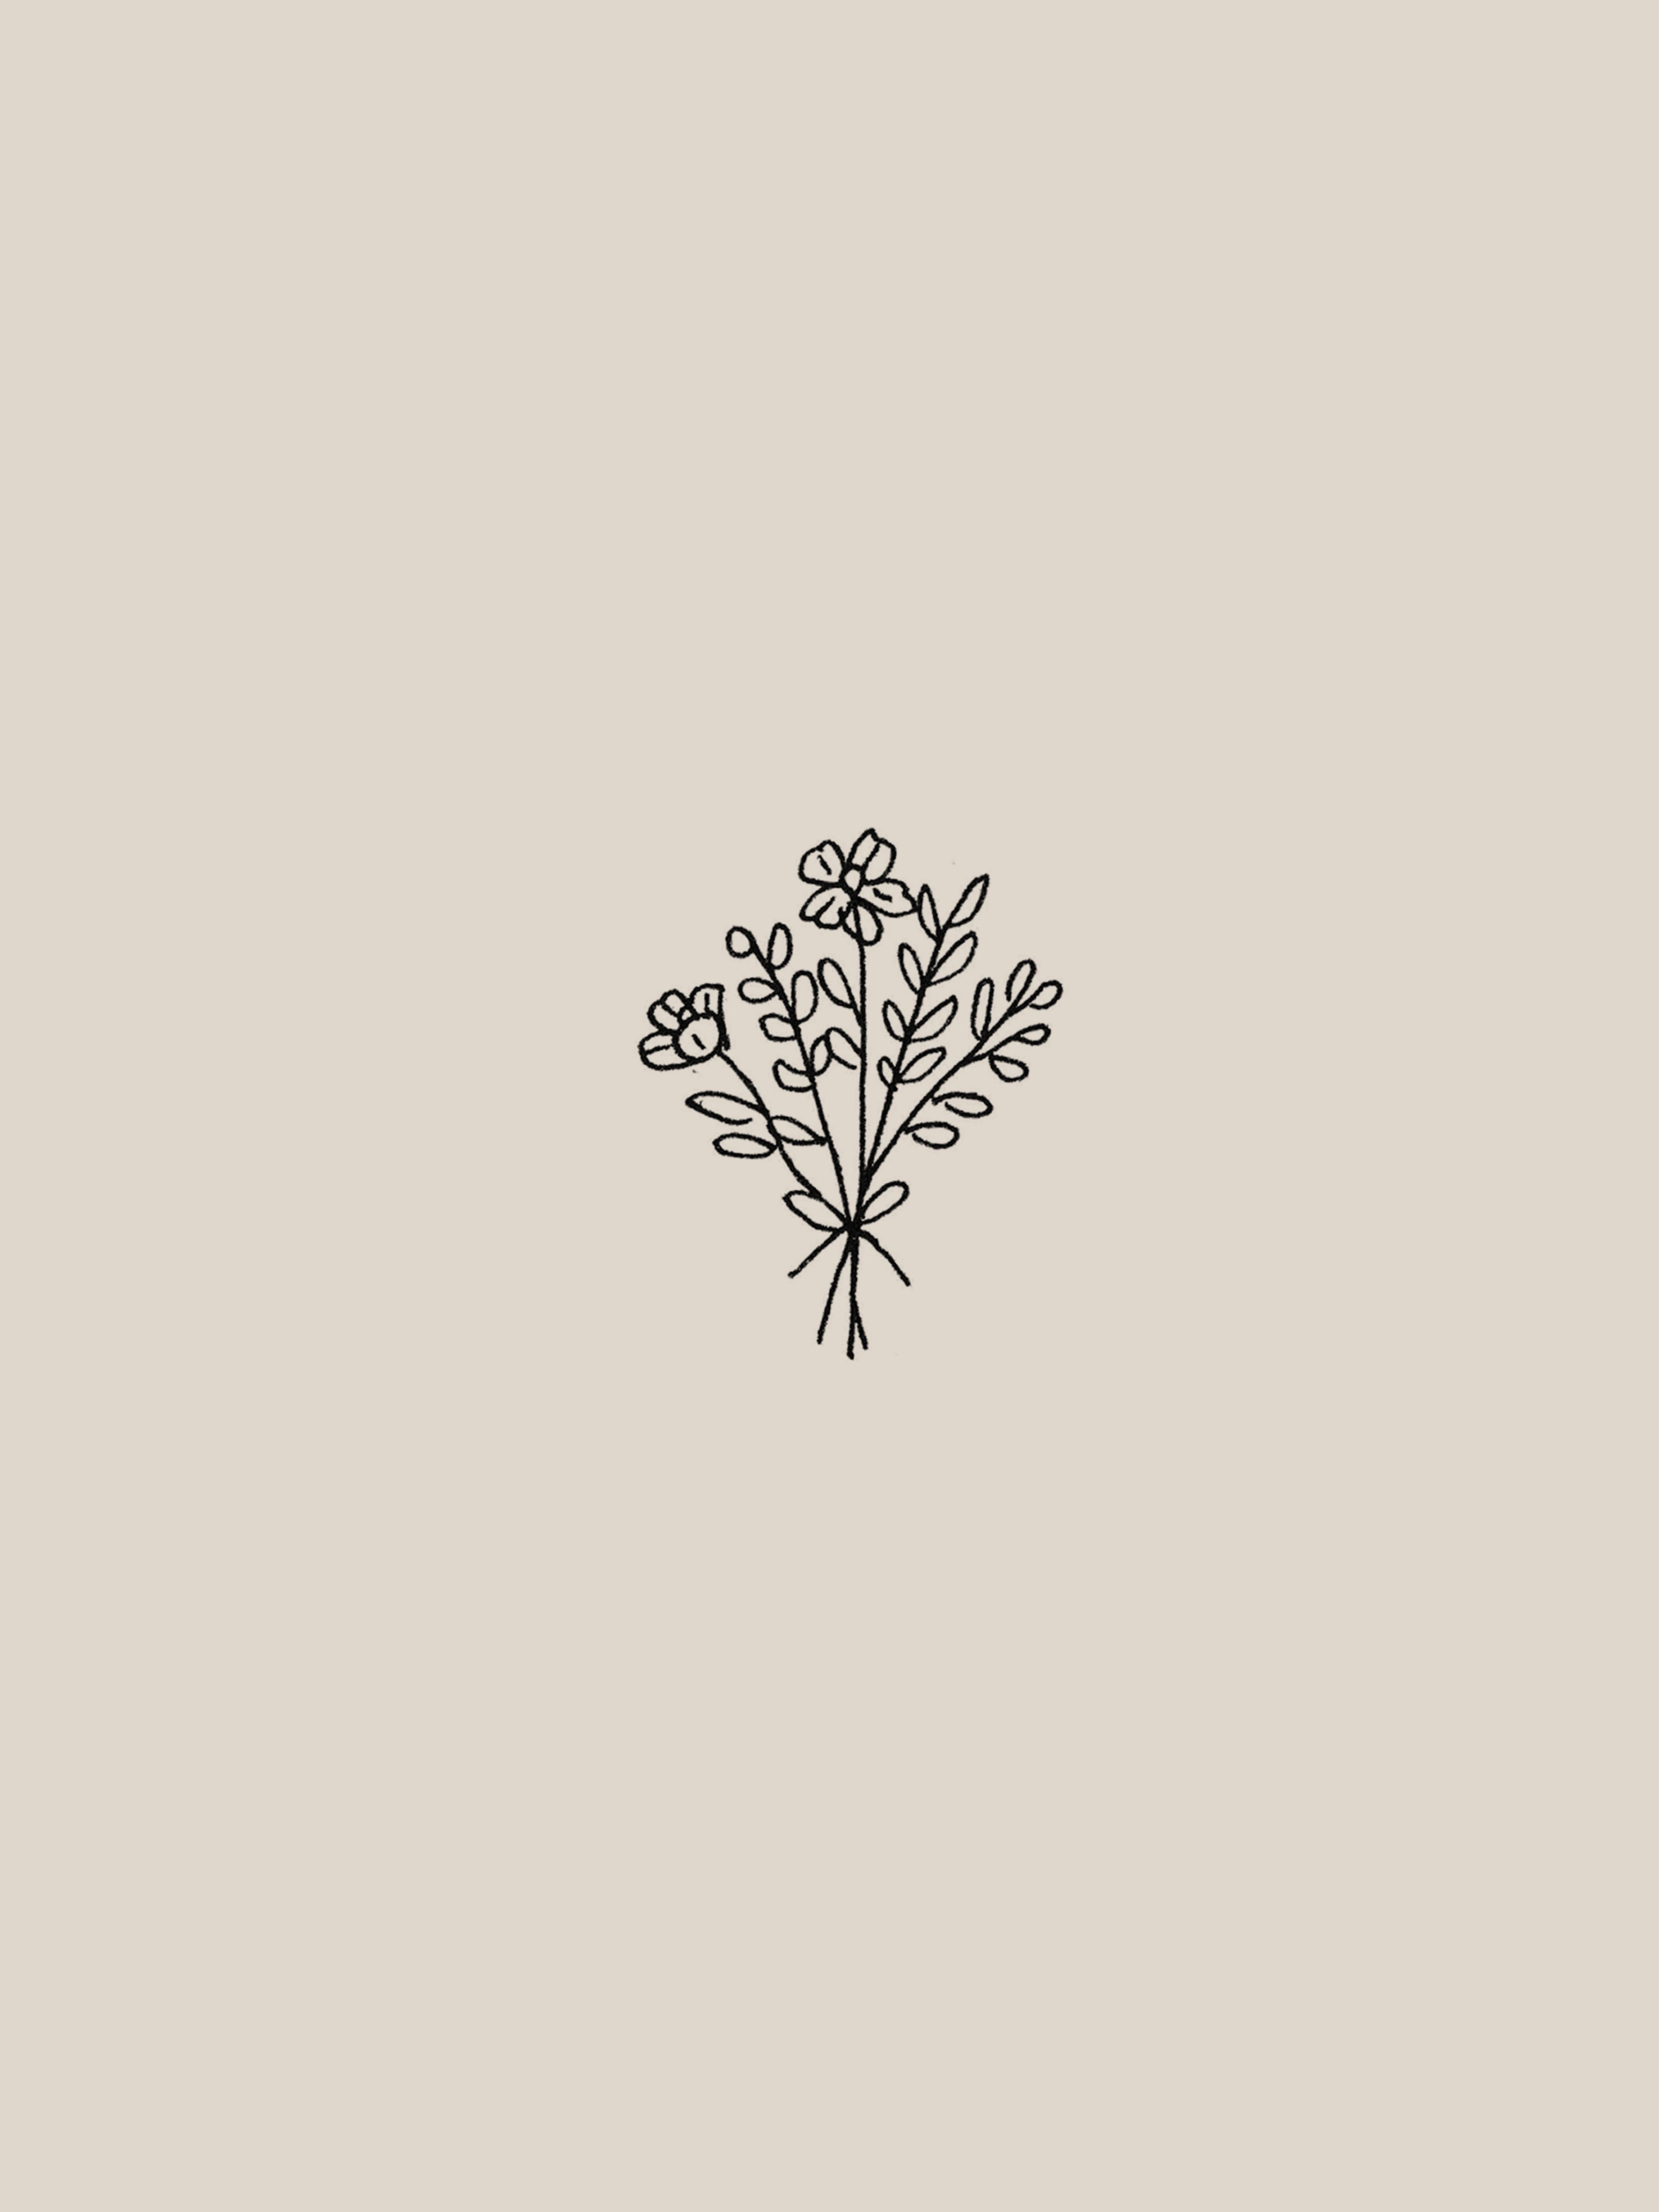 Aesthetic Minimalist Flower Drawing Wallpapers